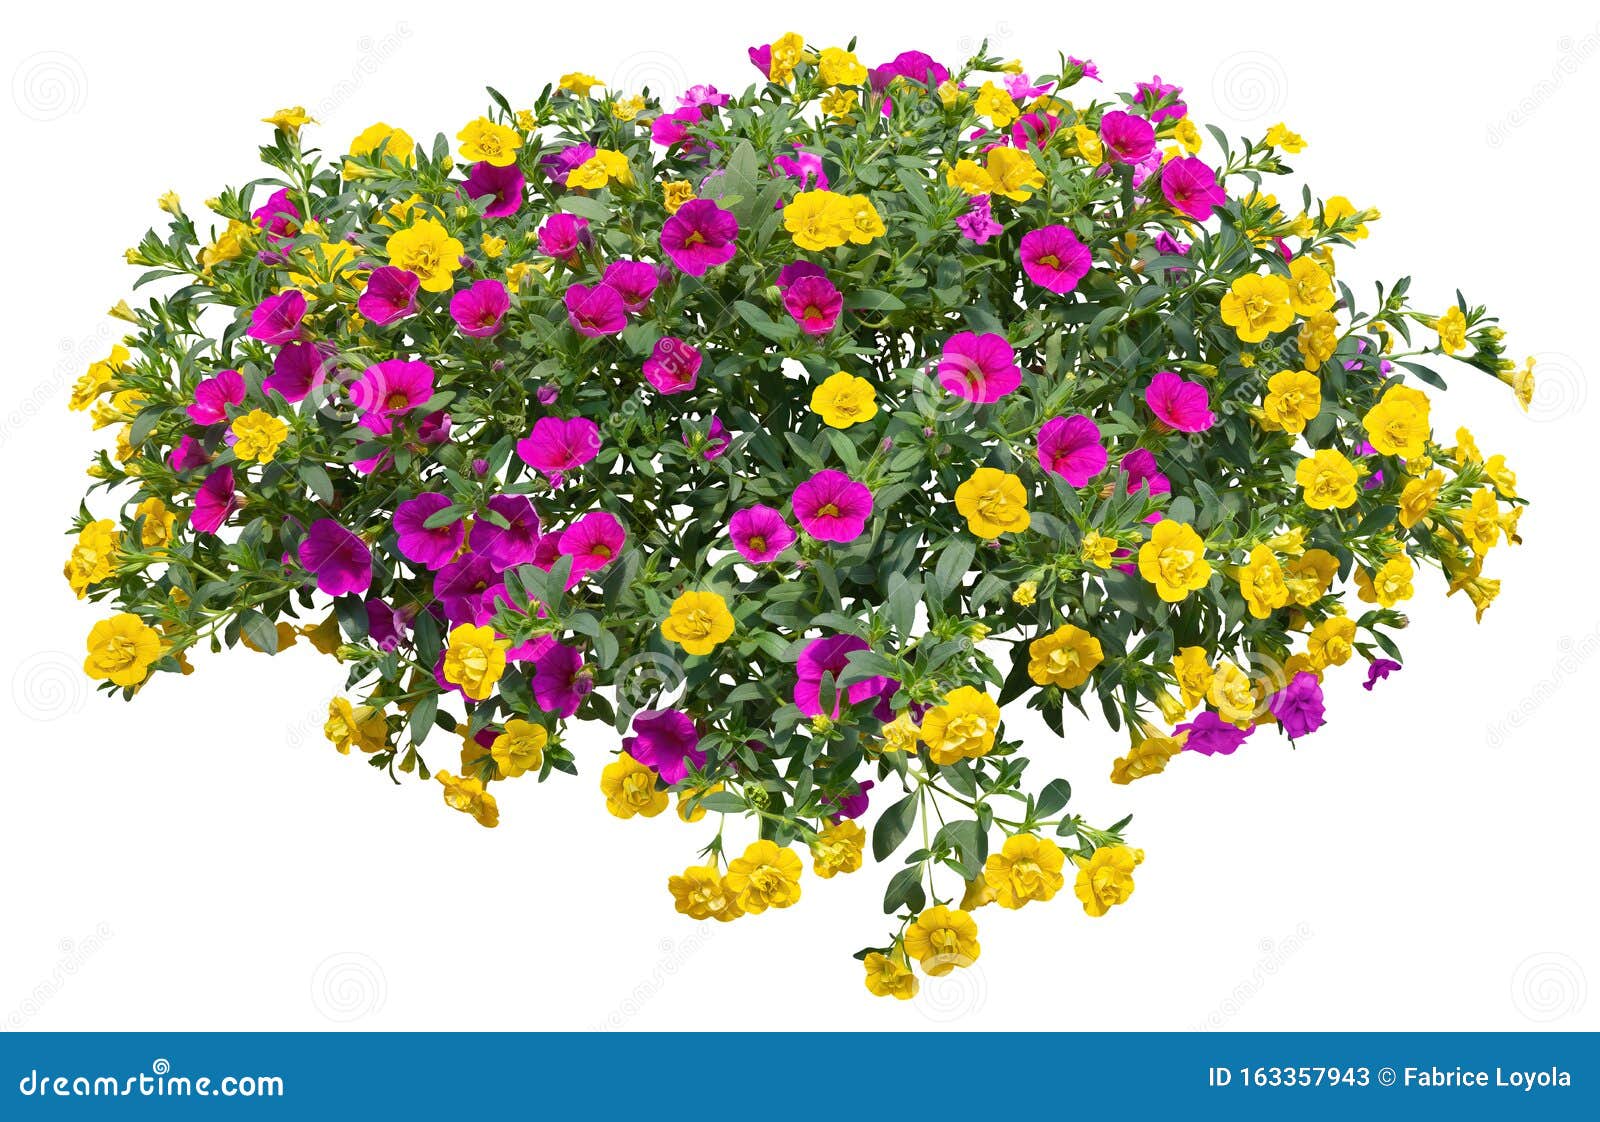 Cutout Pink Flowers. Petunia Stock Image - Image of landscaping ...